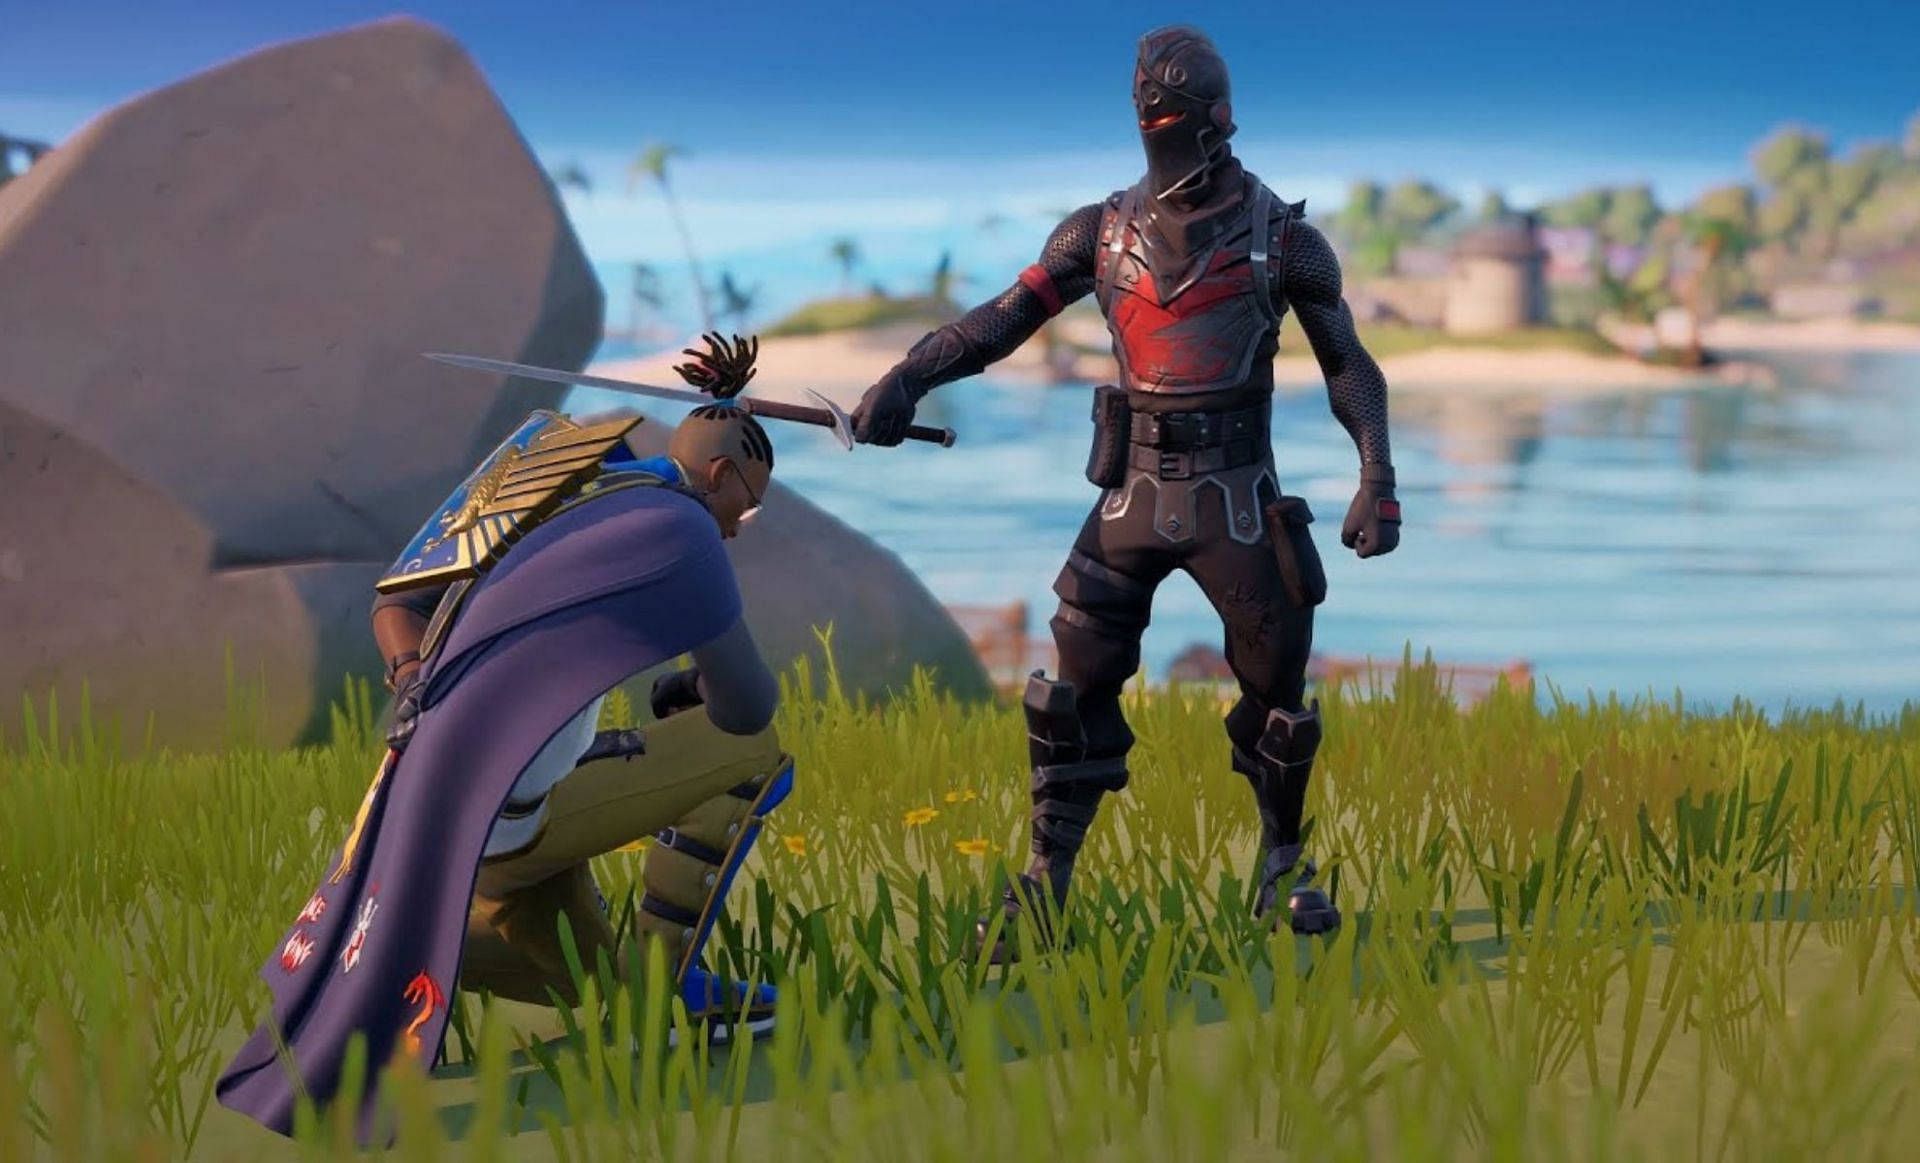 The Fort Knighted emote requires two people (Image via Tabor Hill on YouTube)